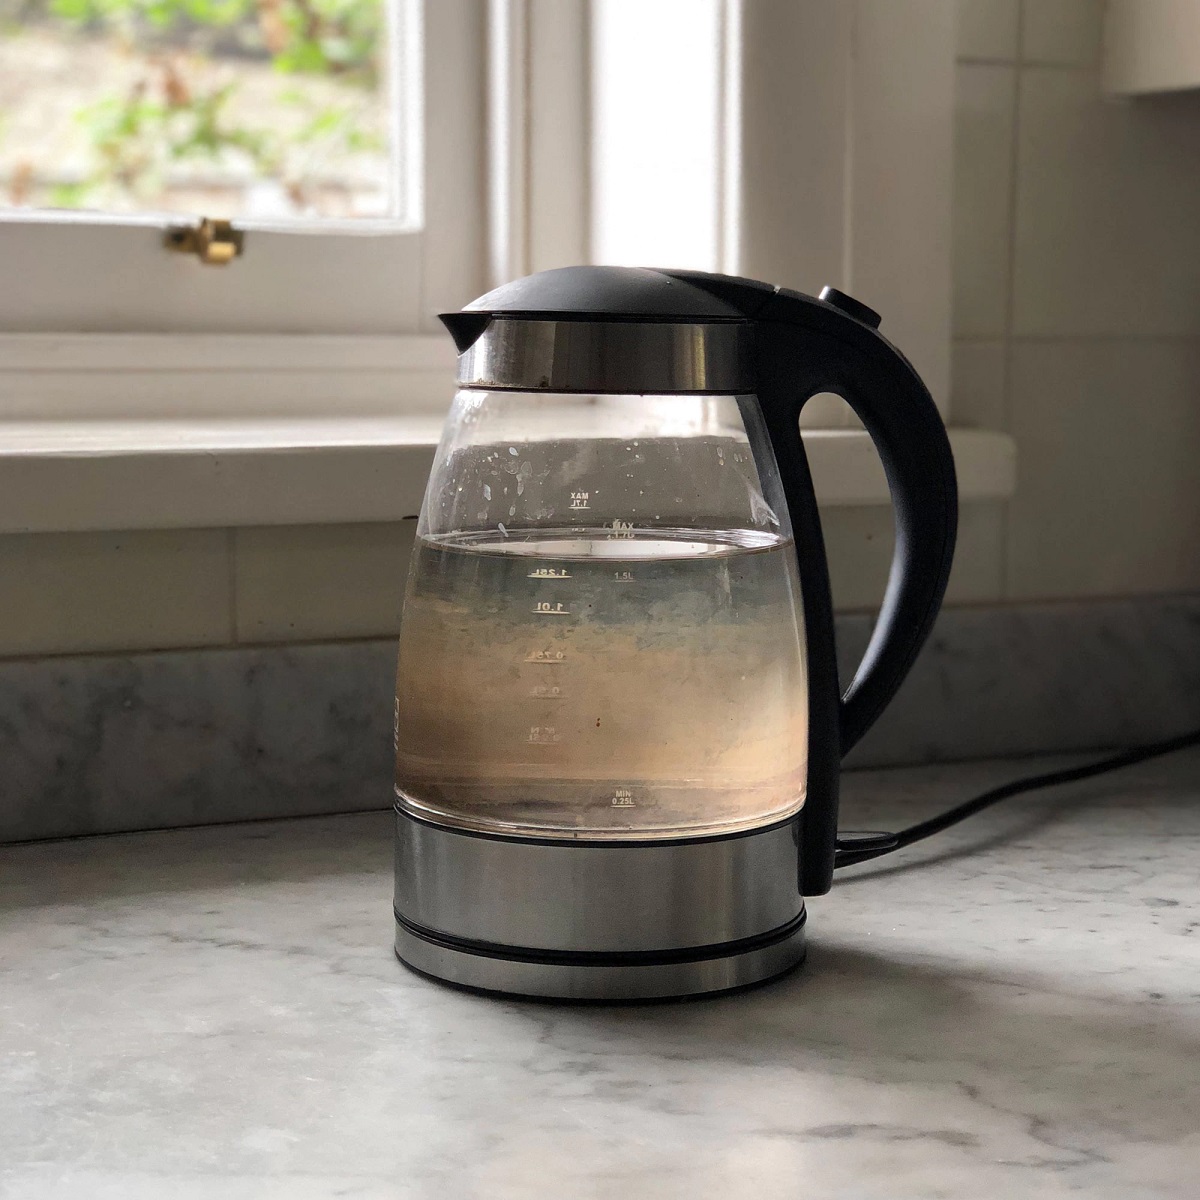 How To Descale A Electric Kettle